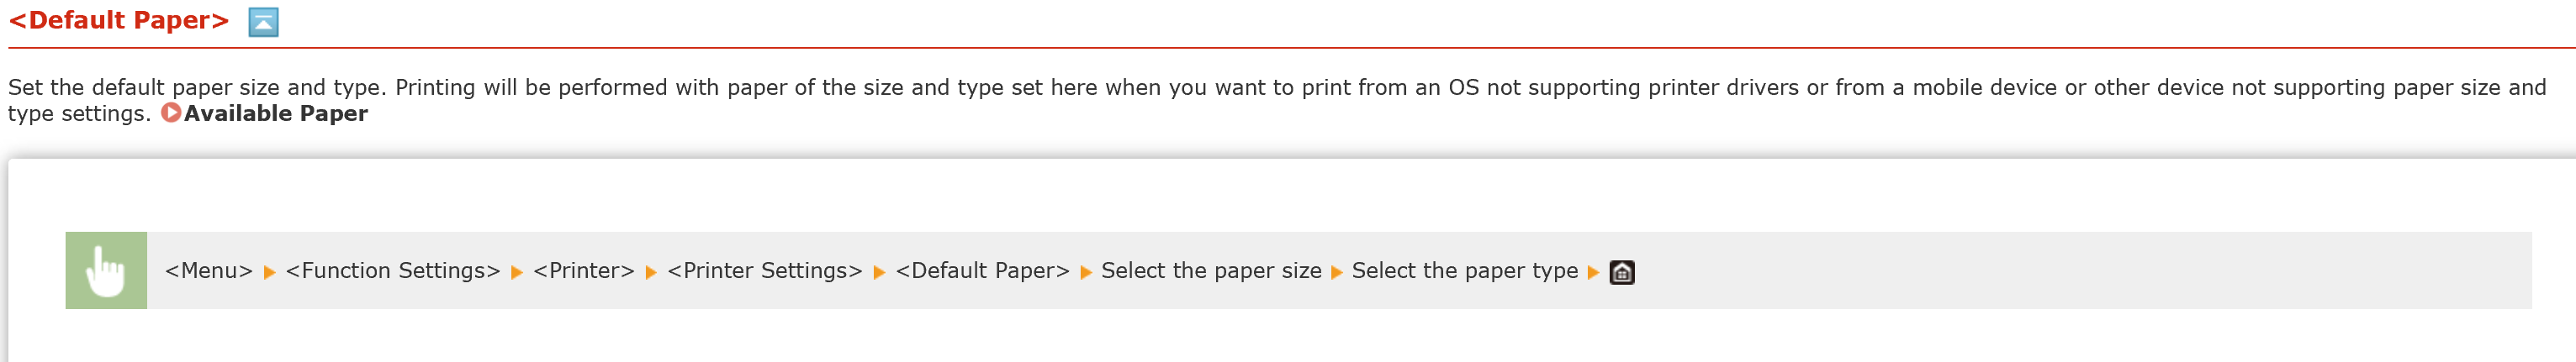 Paper Size and Type Settings